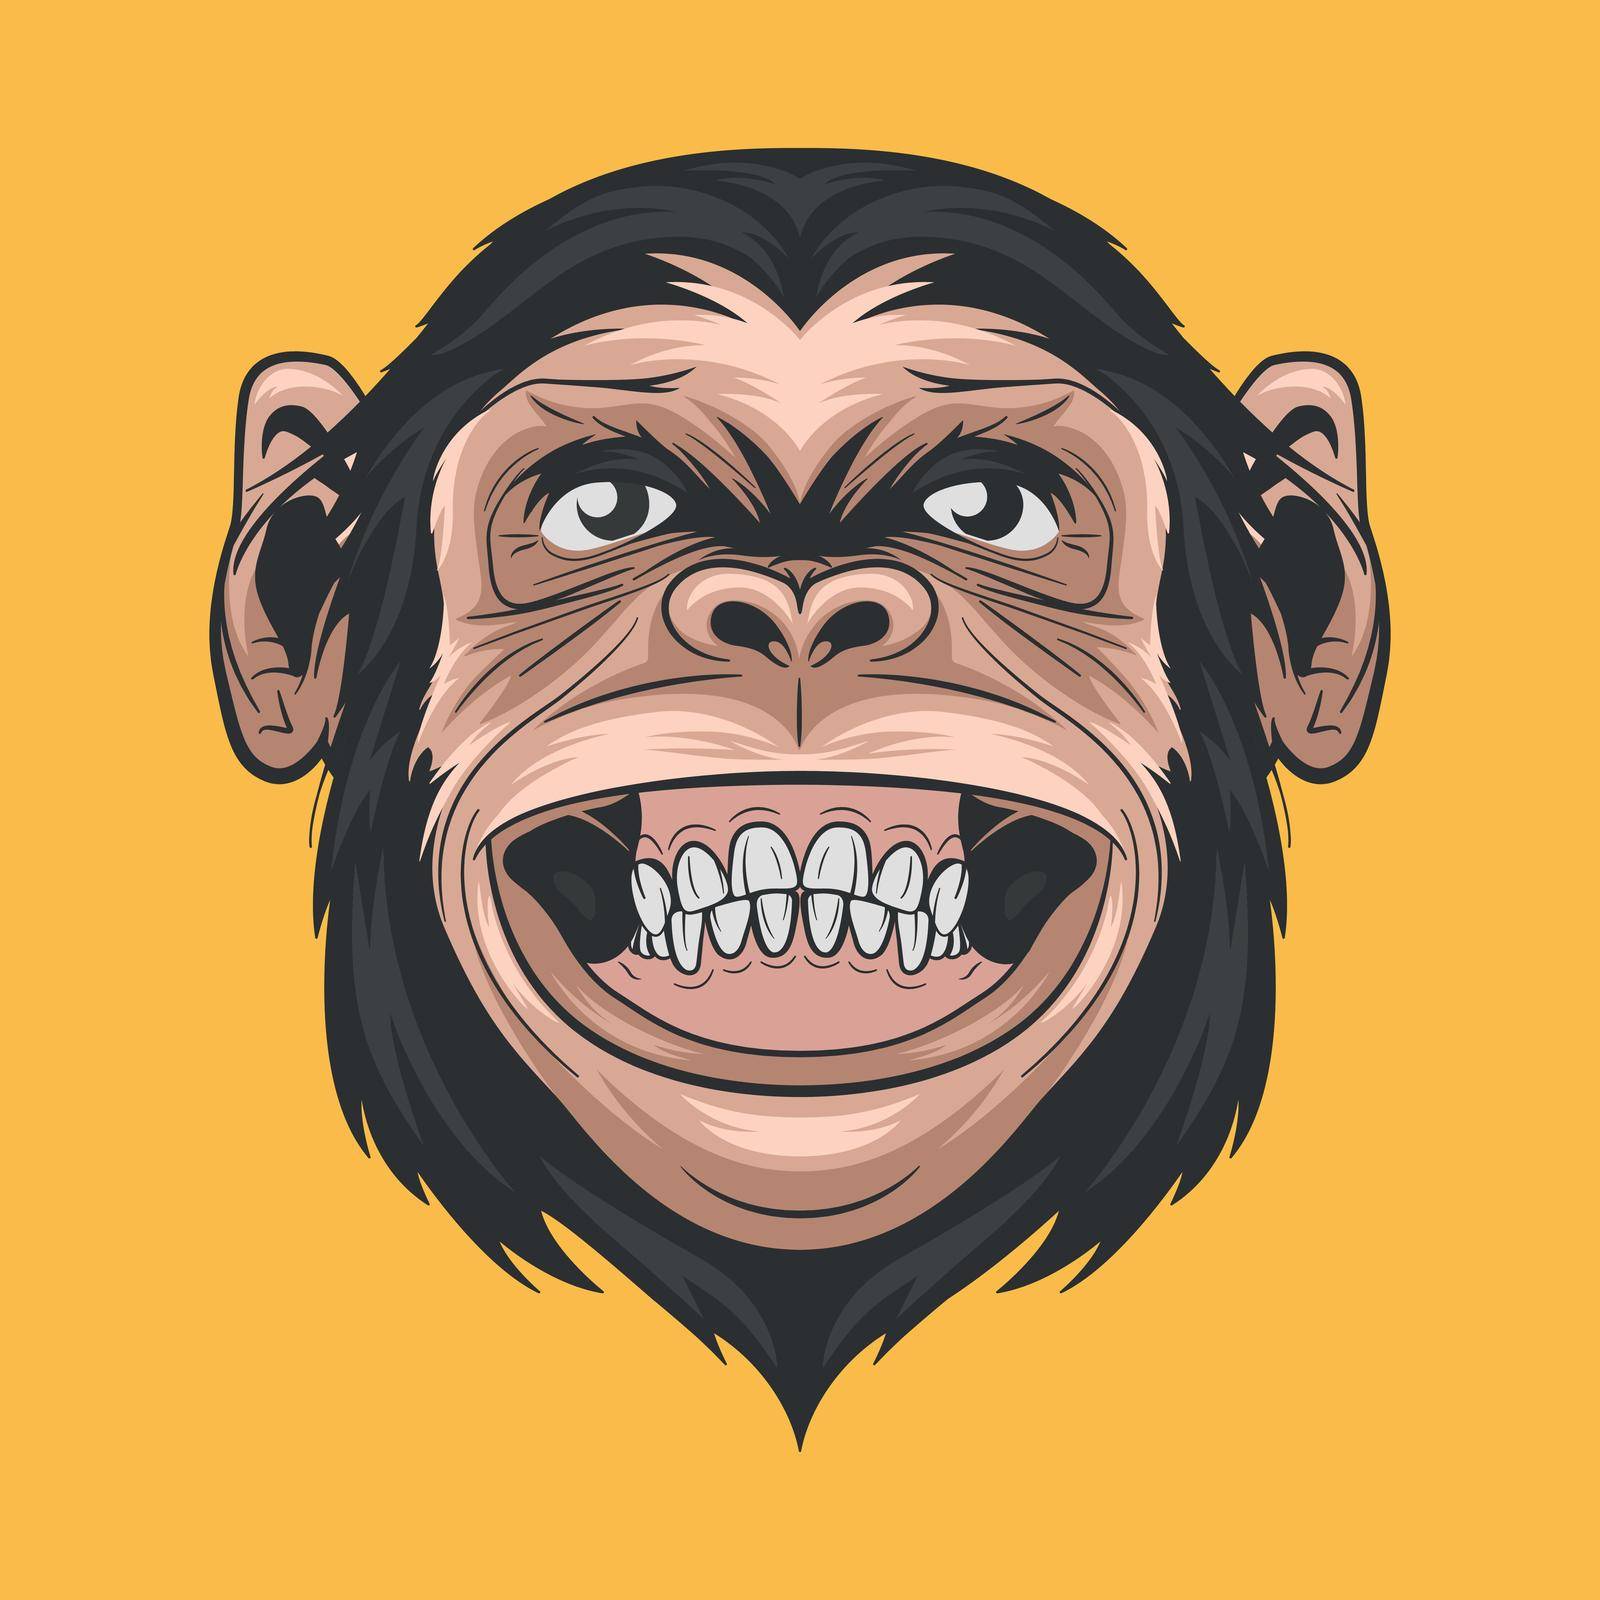 Vector Hand Drawn Smiling Chimpanzee Ape . Colored Abstract Funny Monkey Head for Wall Art, T-shirt Print, Poster. Cartoon Cute Chimp Monkey Icon, Logo, Illustration.